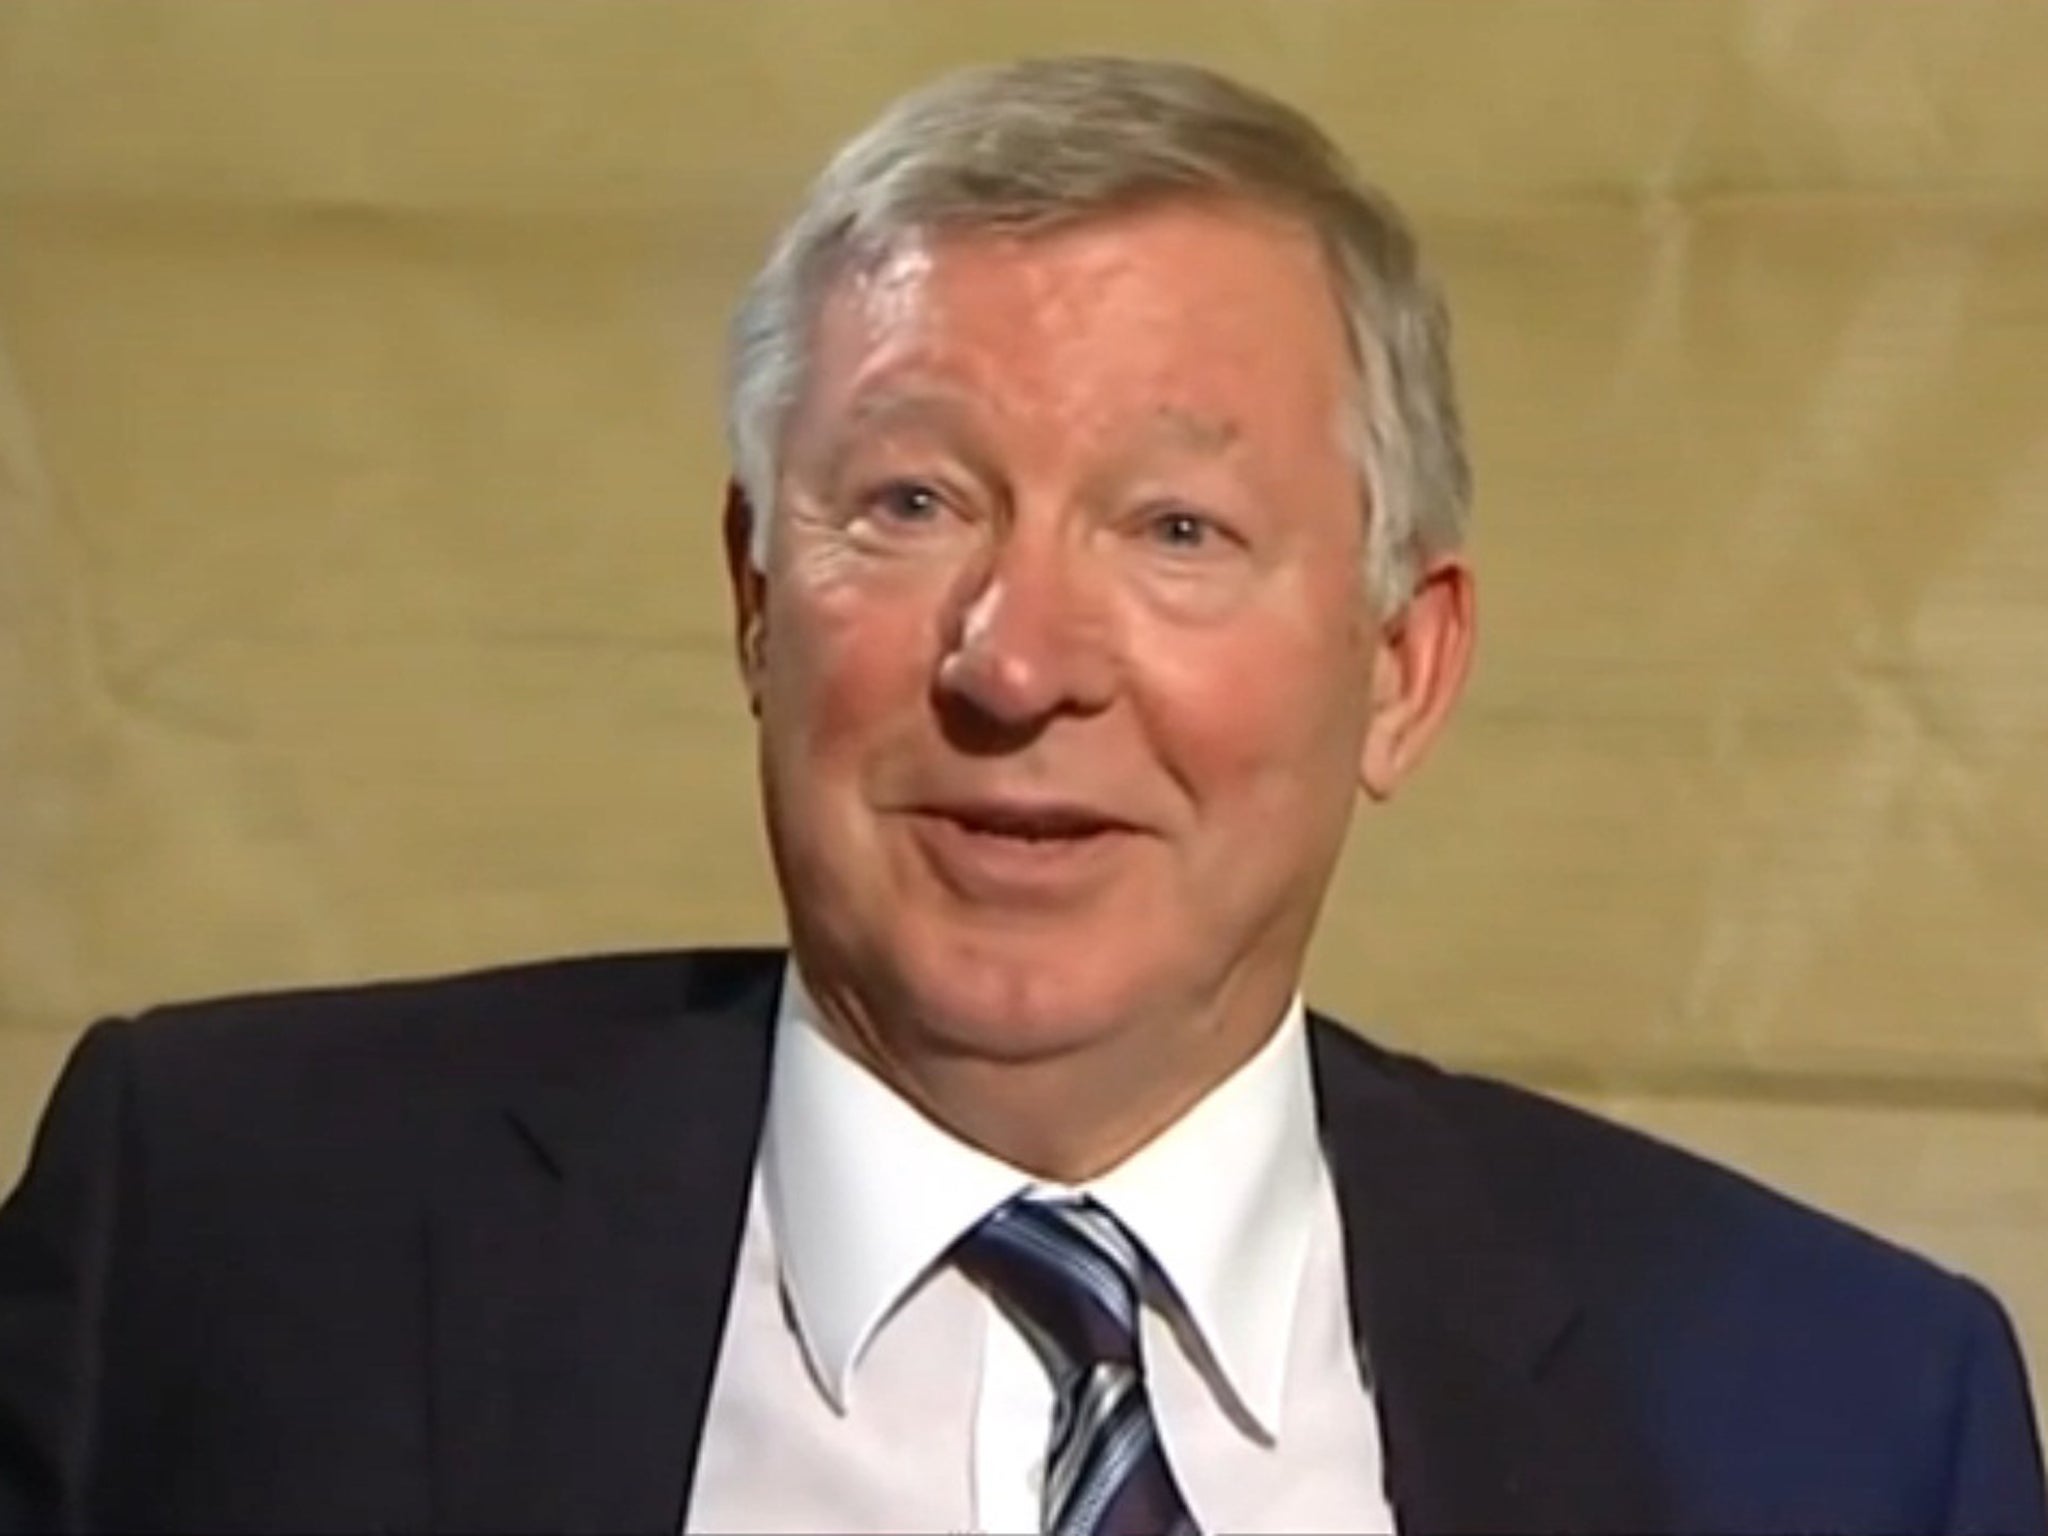 Ferguson looks bemused when asked about his political beliefs